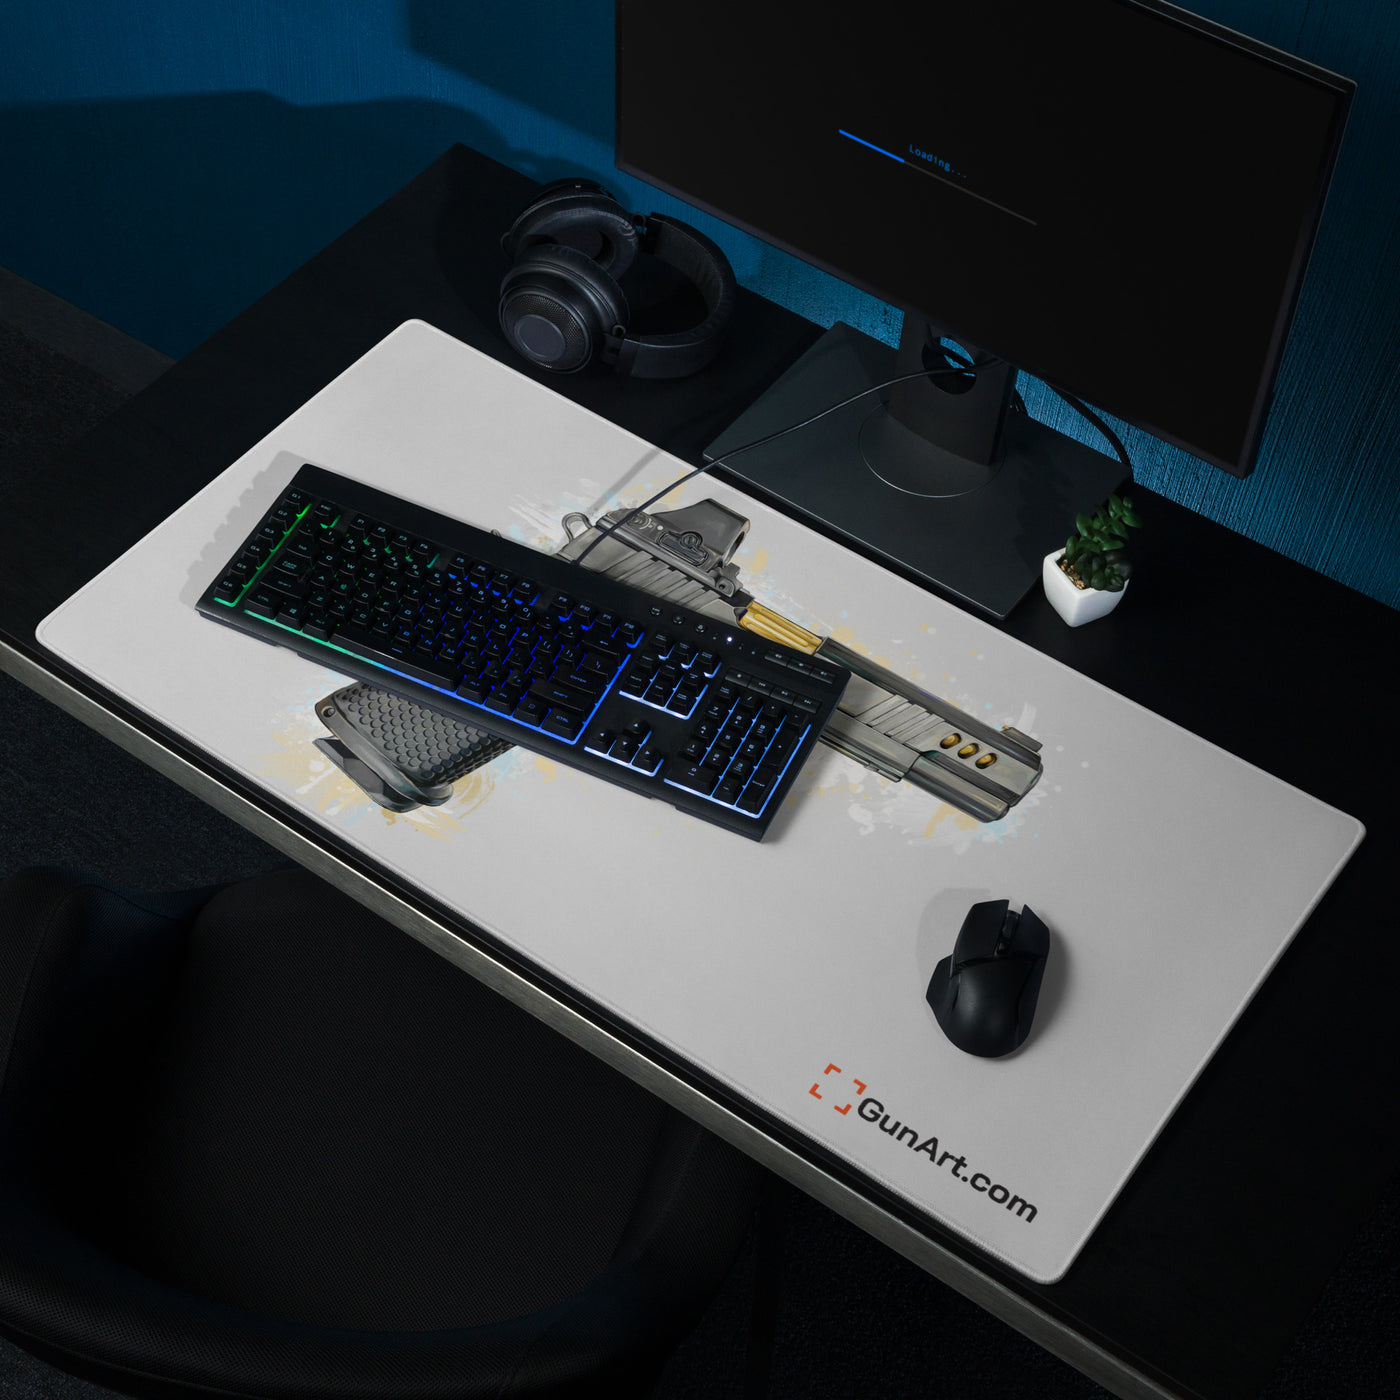 2011 Alpha Pistol Gaming Mouse Pad